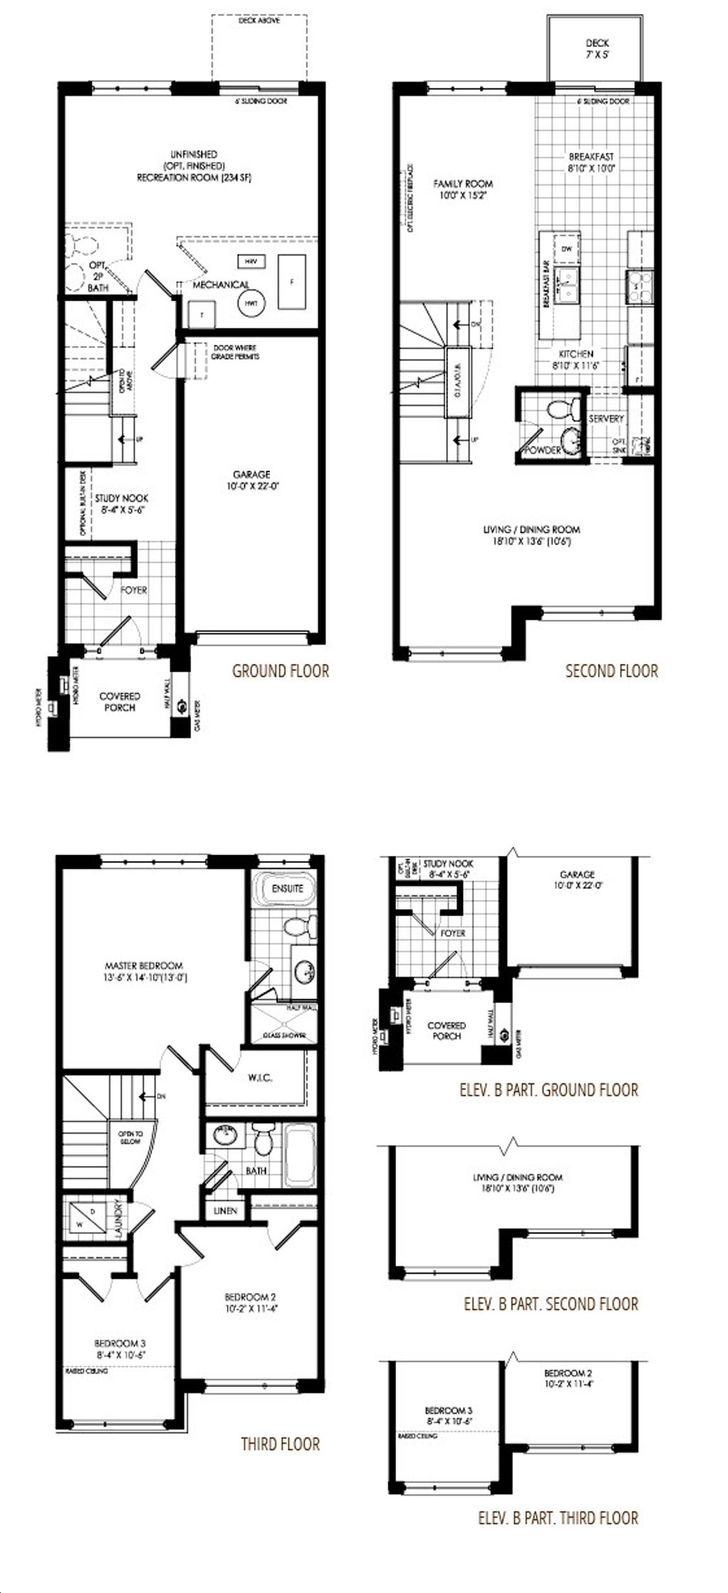 Urban North Townhomes by Pace |Trail Floorplan 3 bed & 2.5 bath